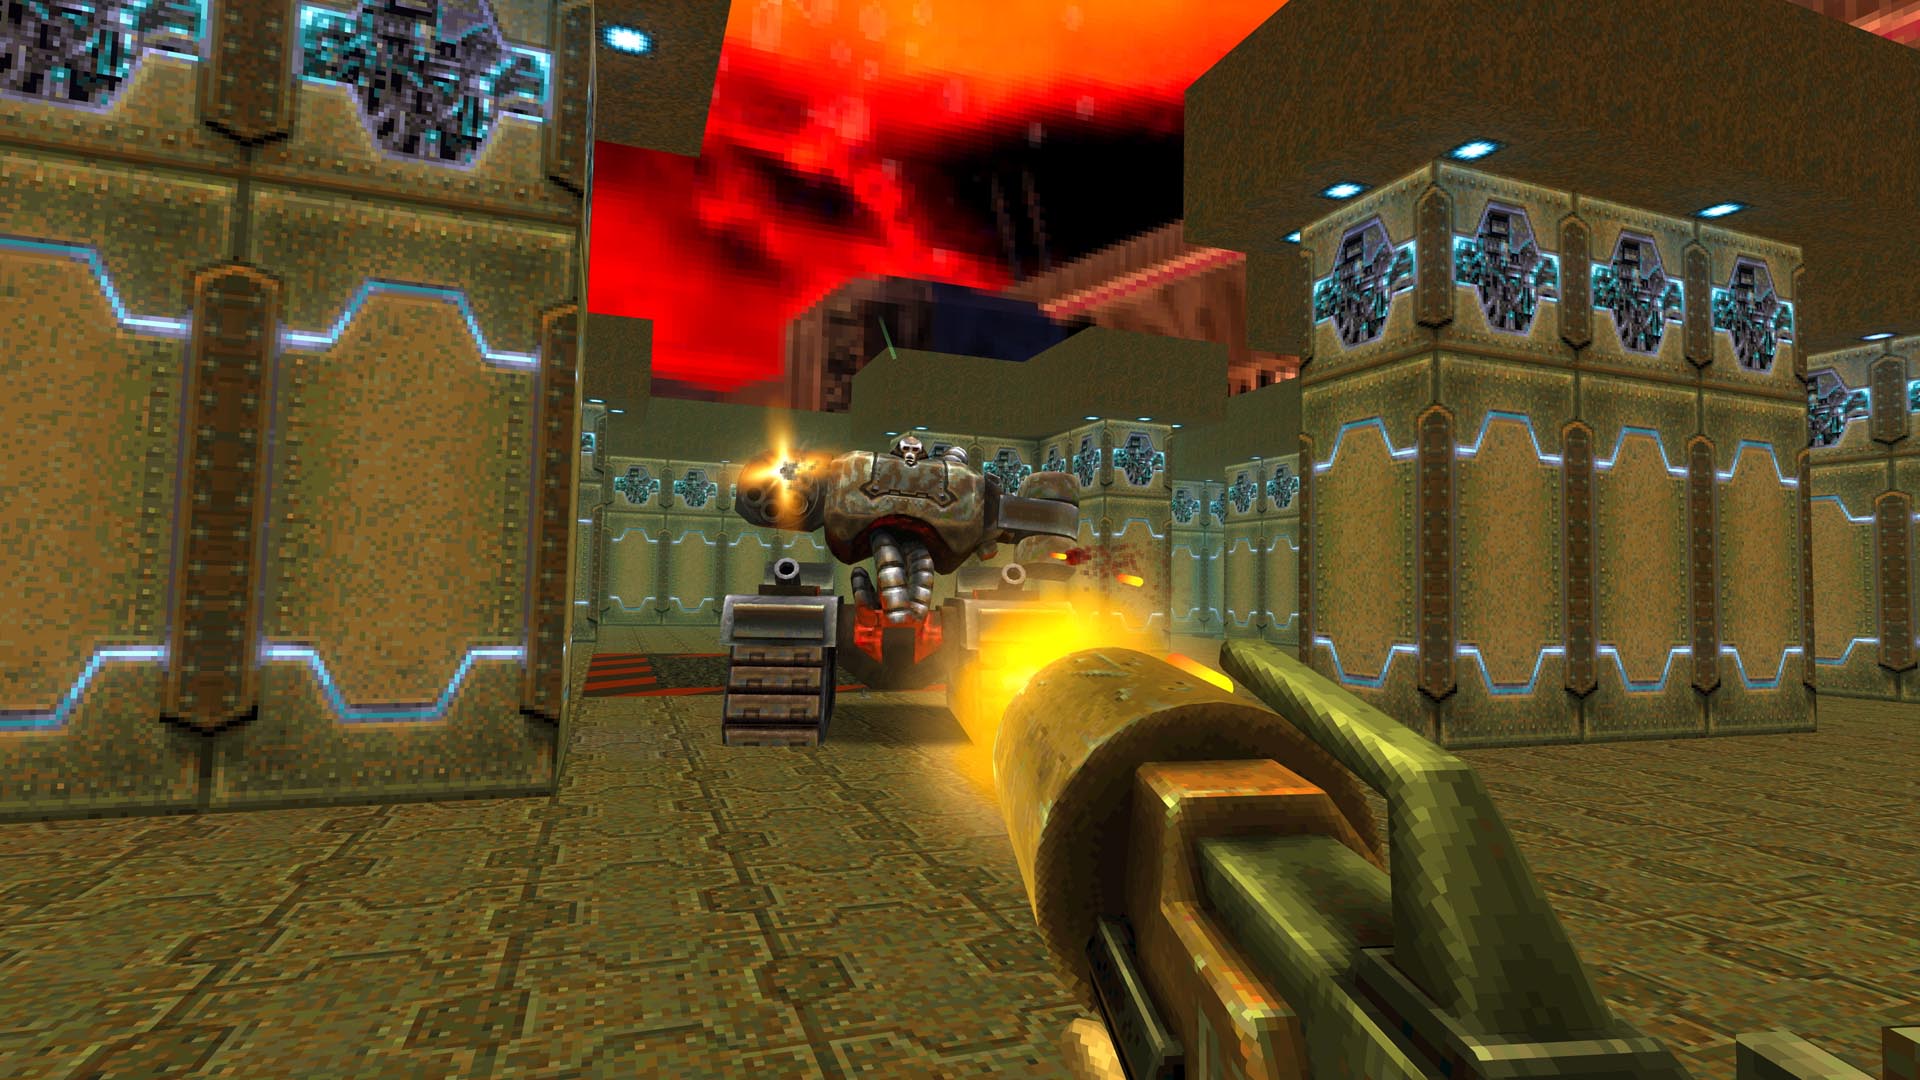 The long-rumored 'Quake II' remaster is out now on PC and consoles